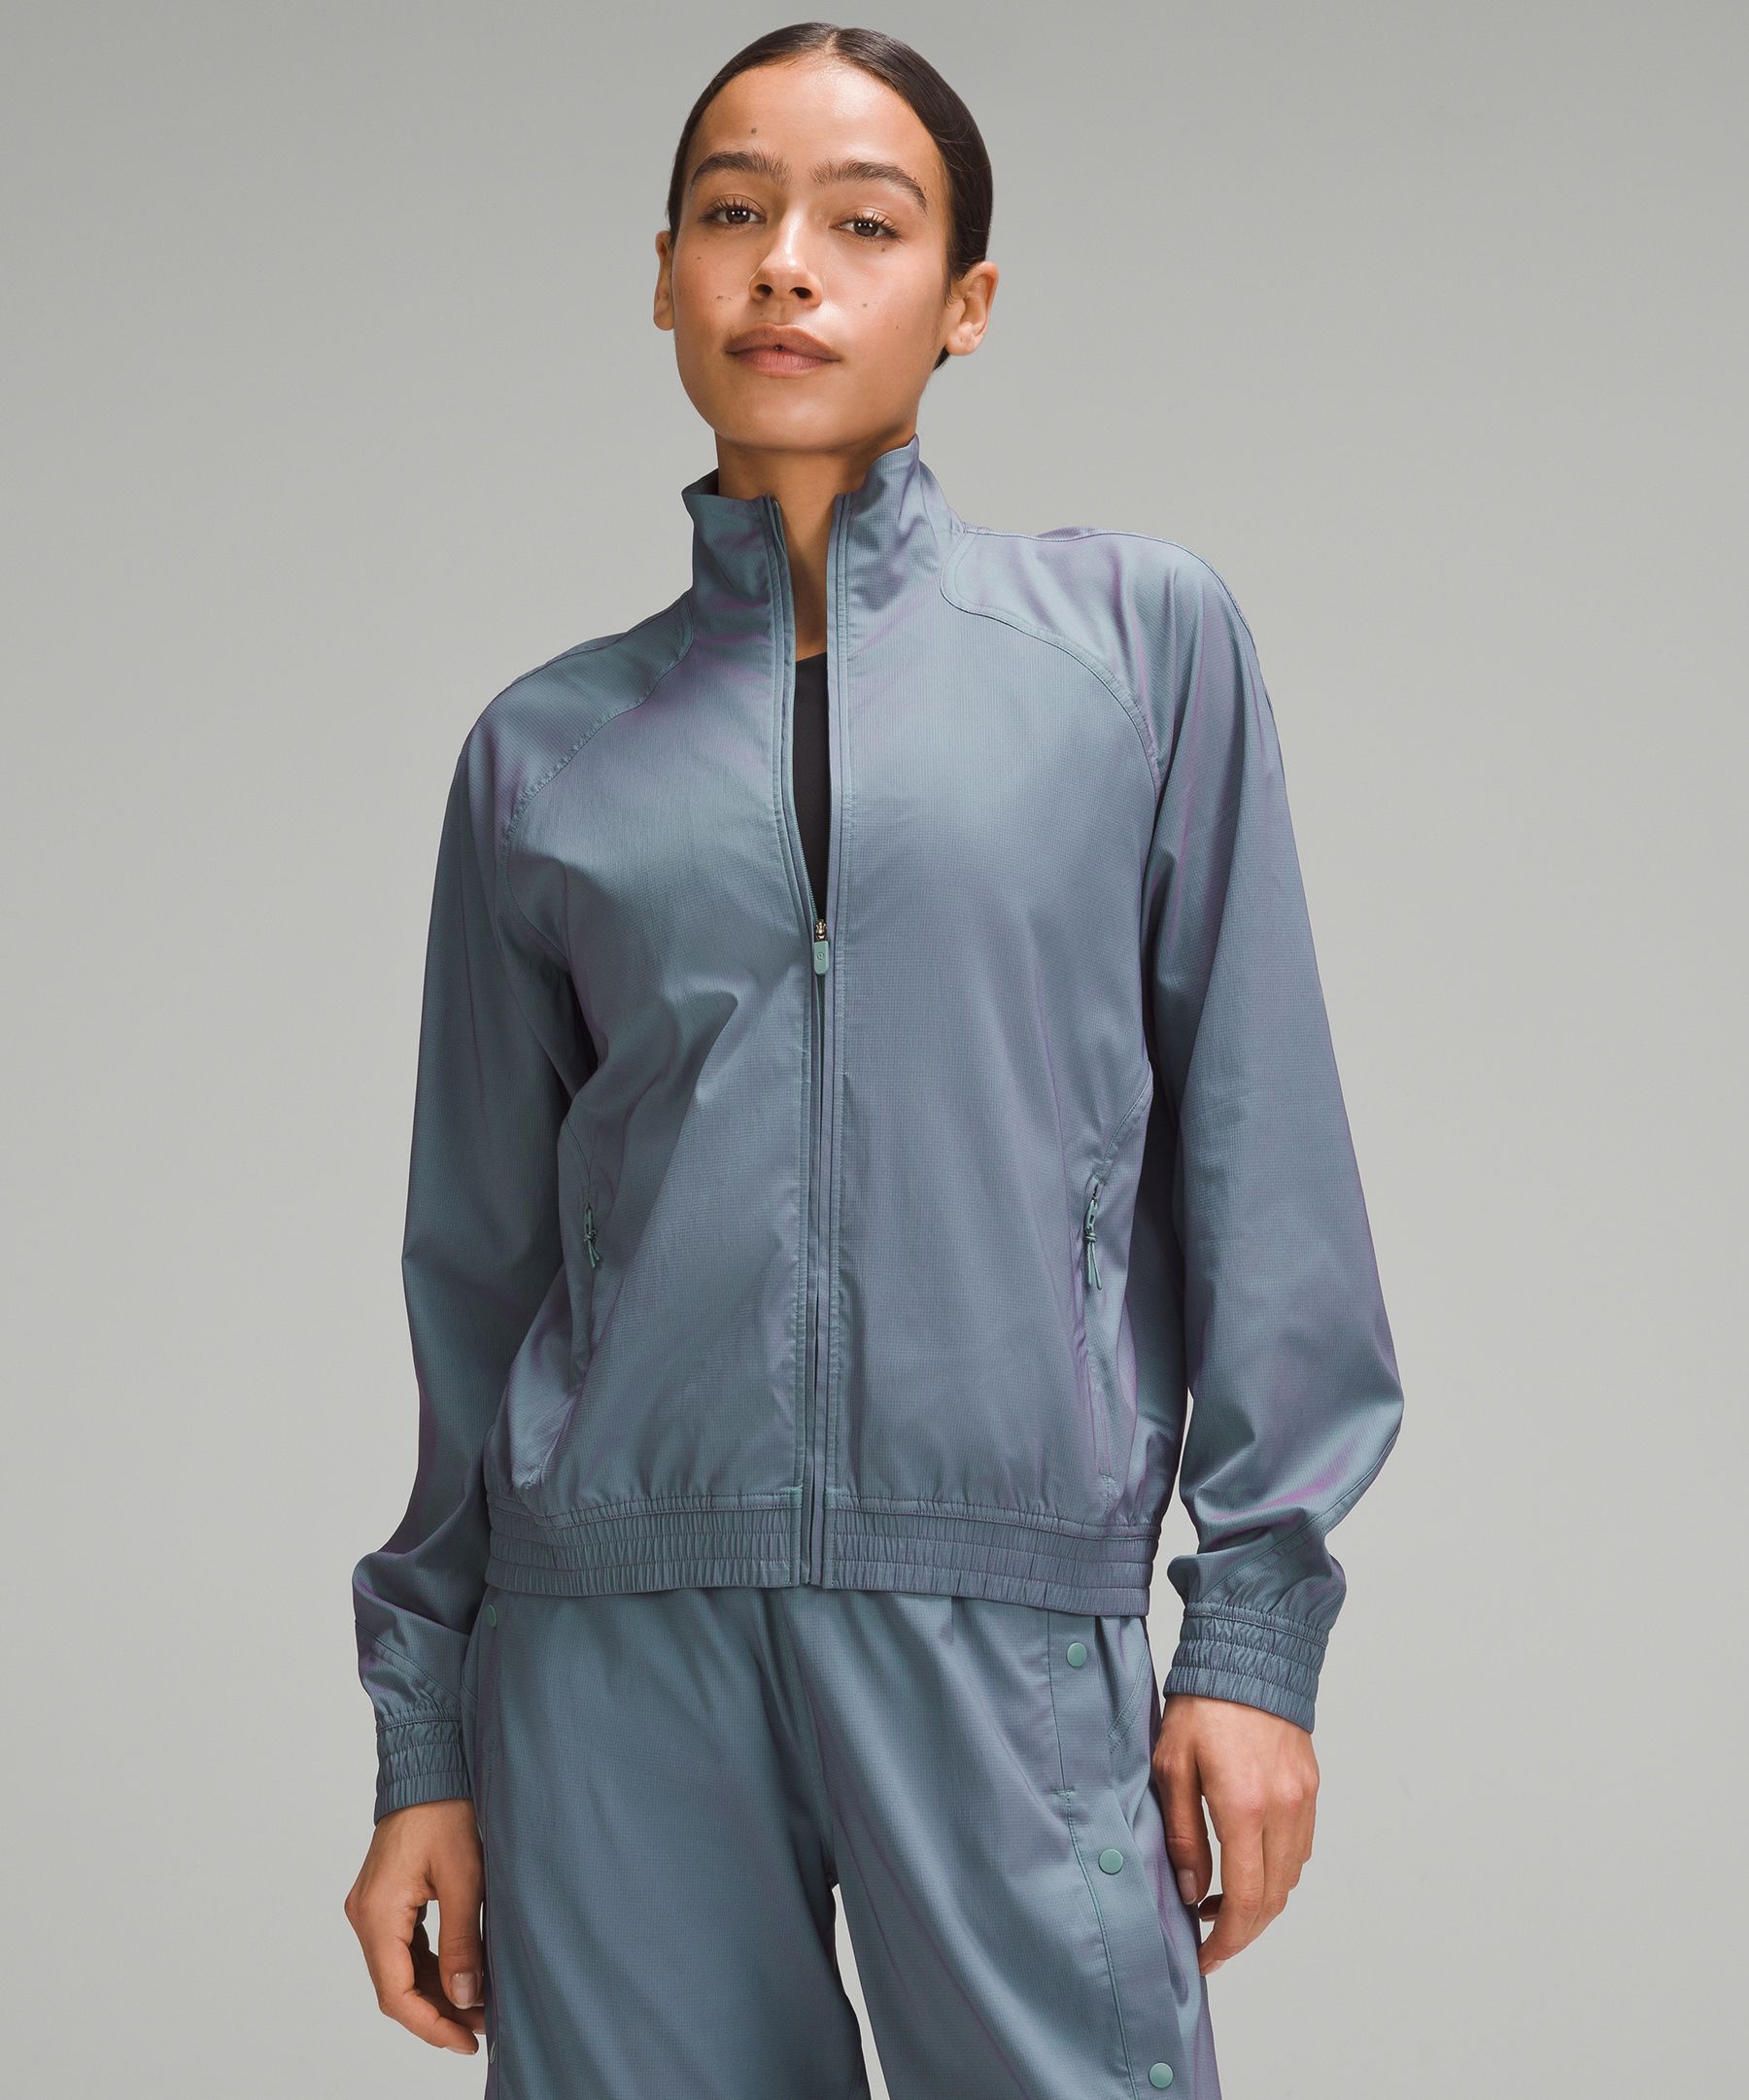 Relaxed-Fit Track Jacket *Iridescent | Women's Hoodies & Sweatshirts ...